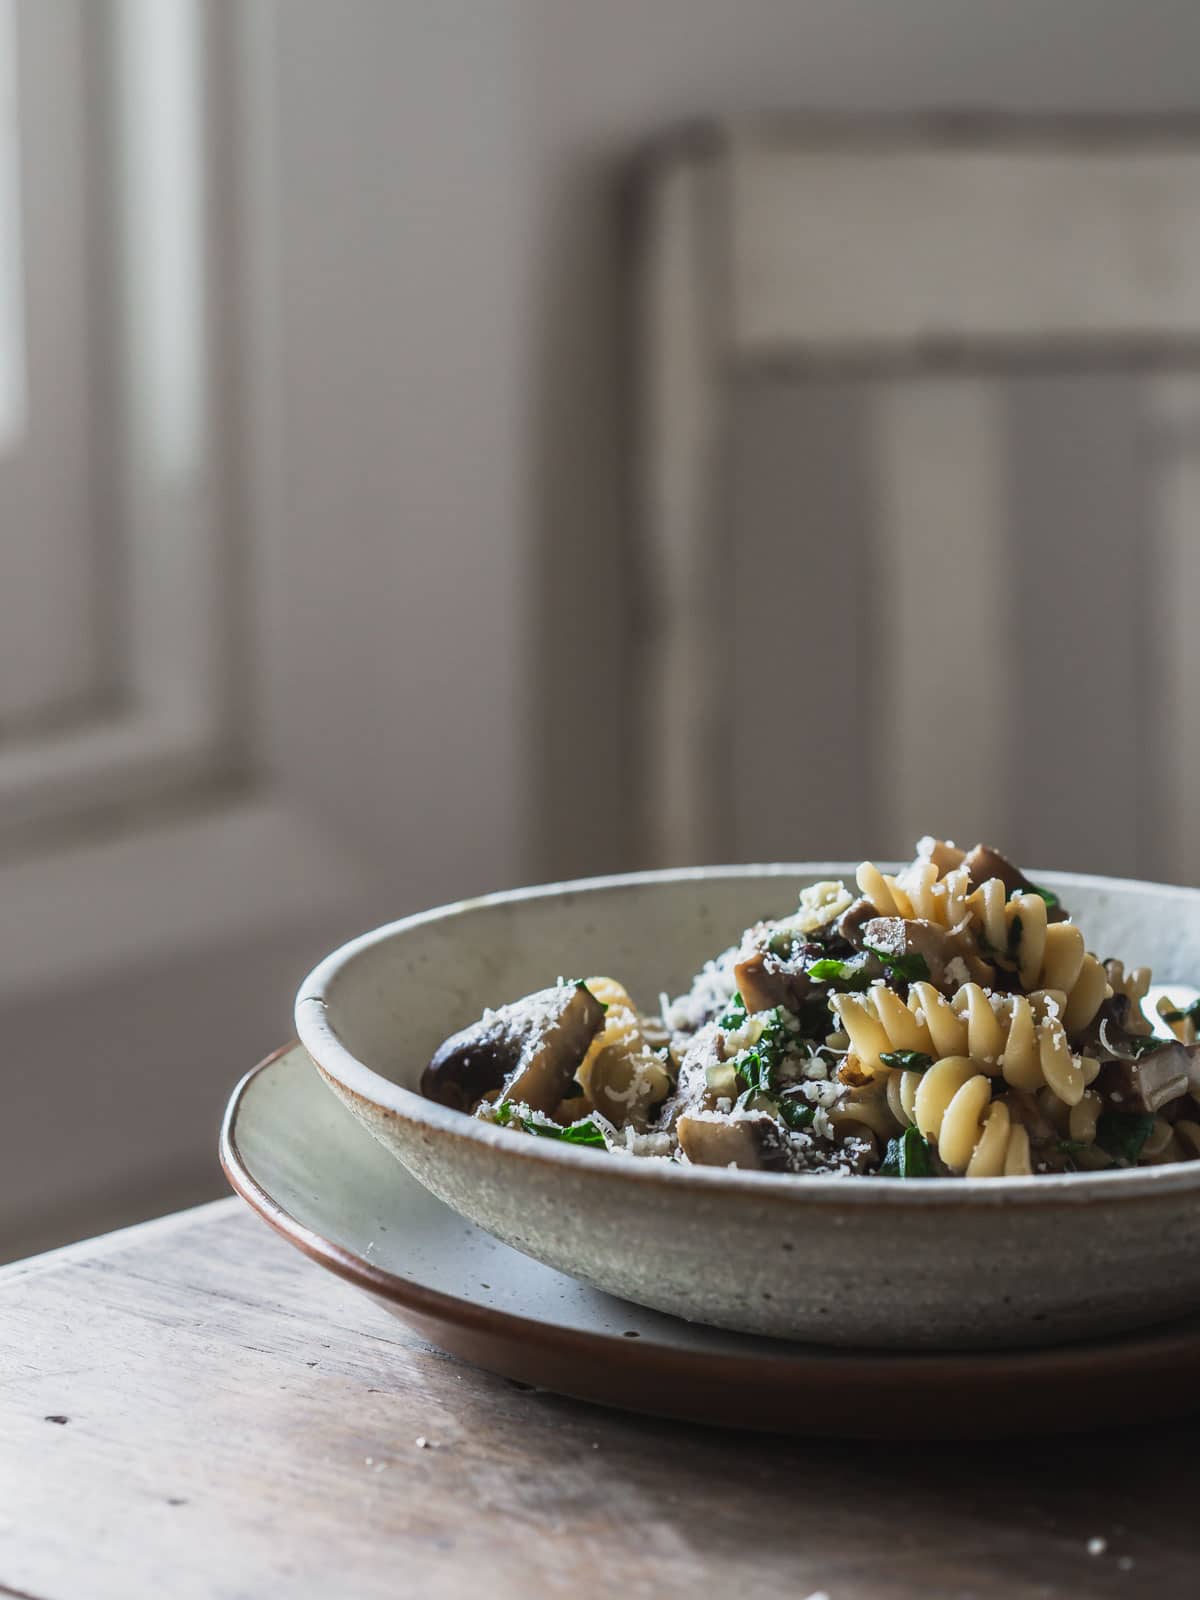 A bowl of mushroom pasta on a wooden table near a window.